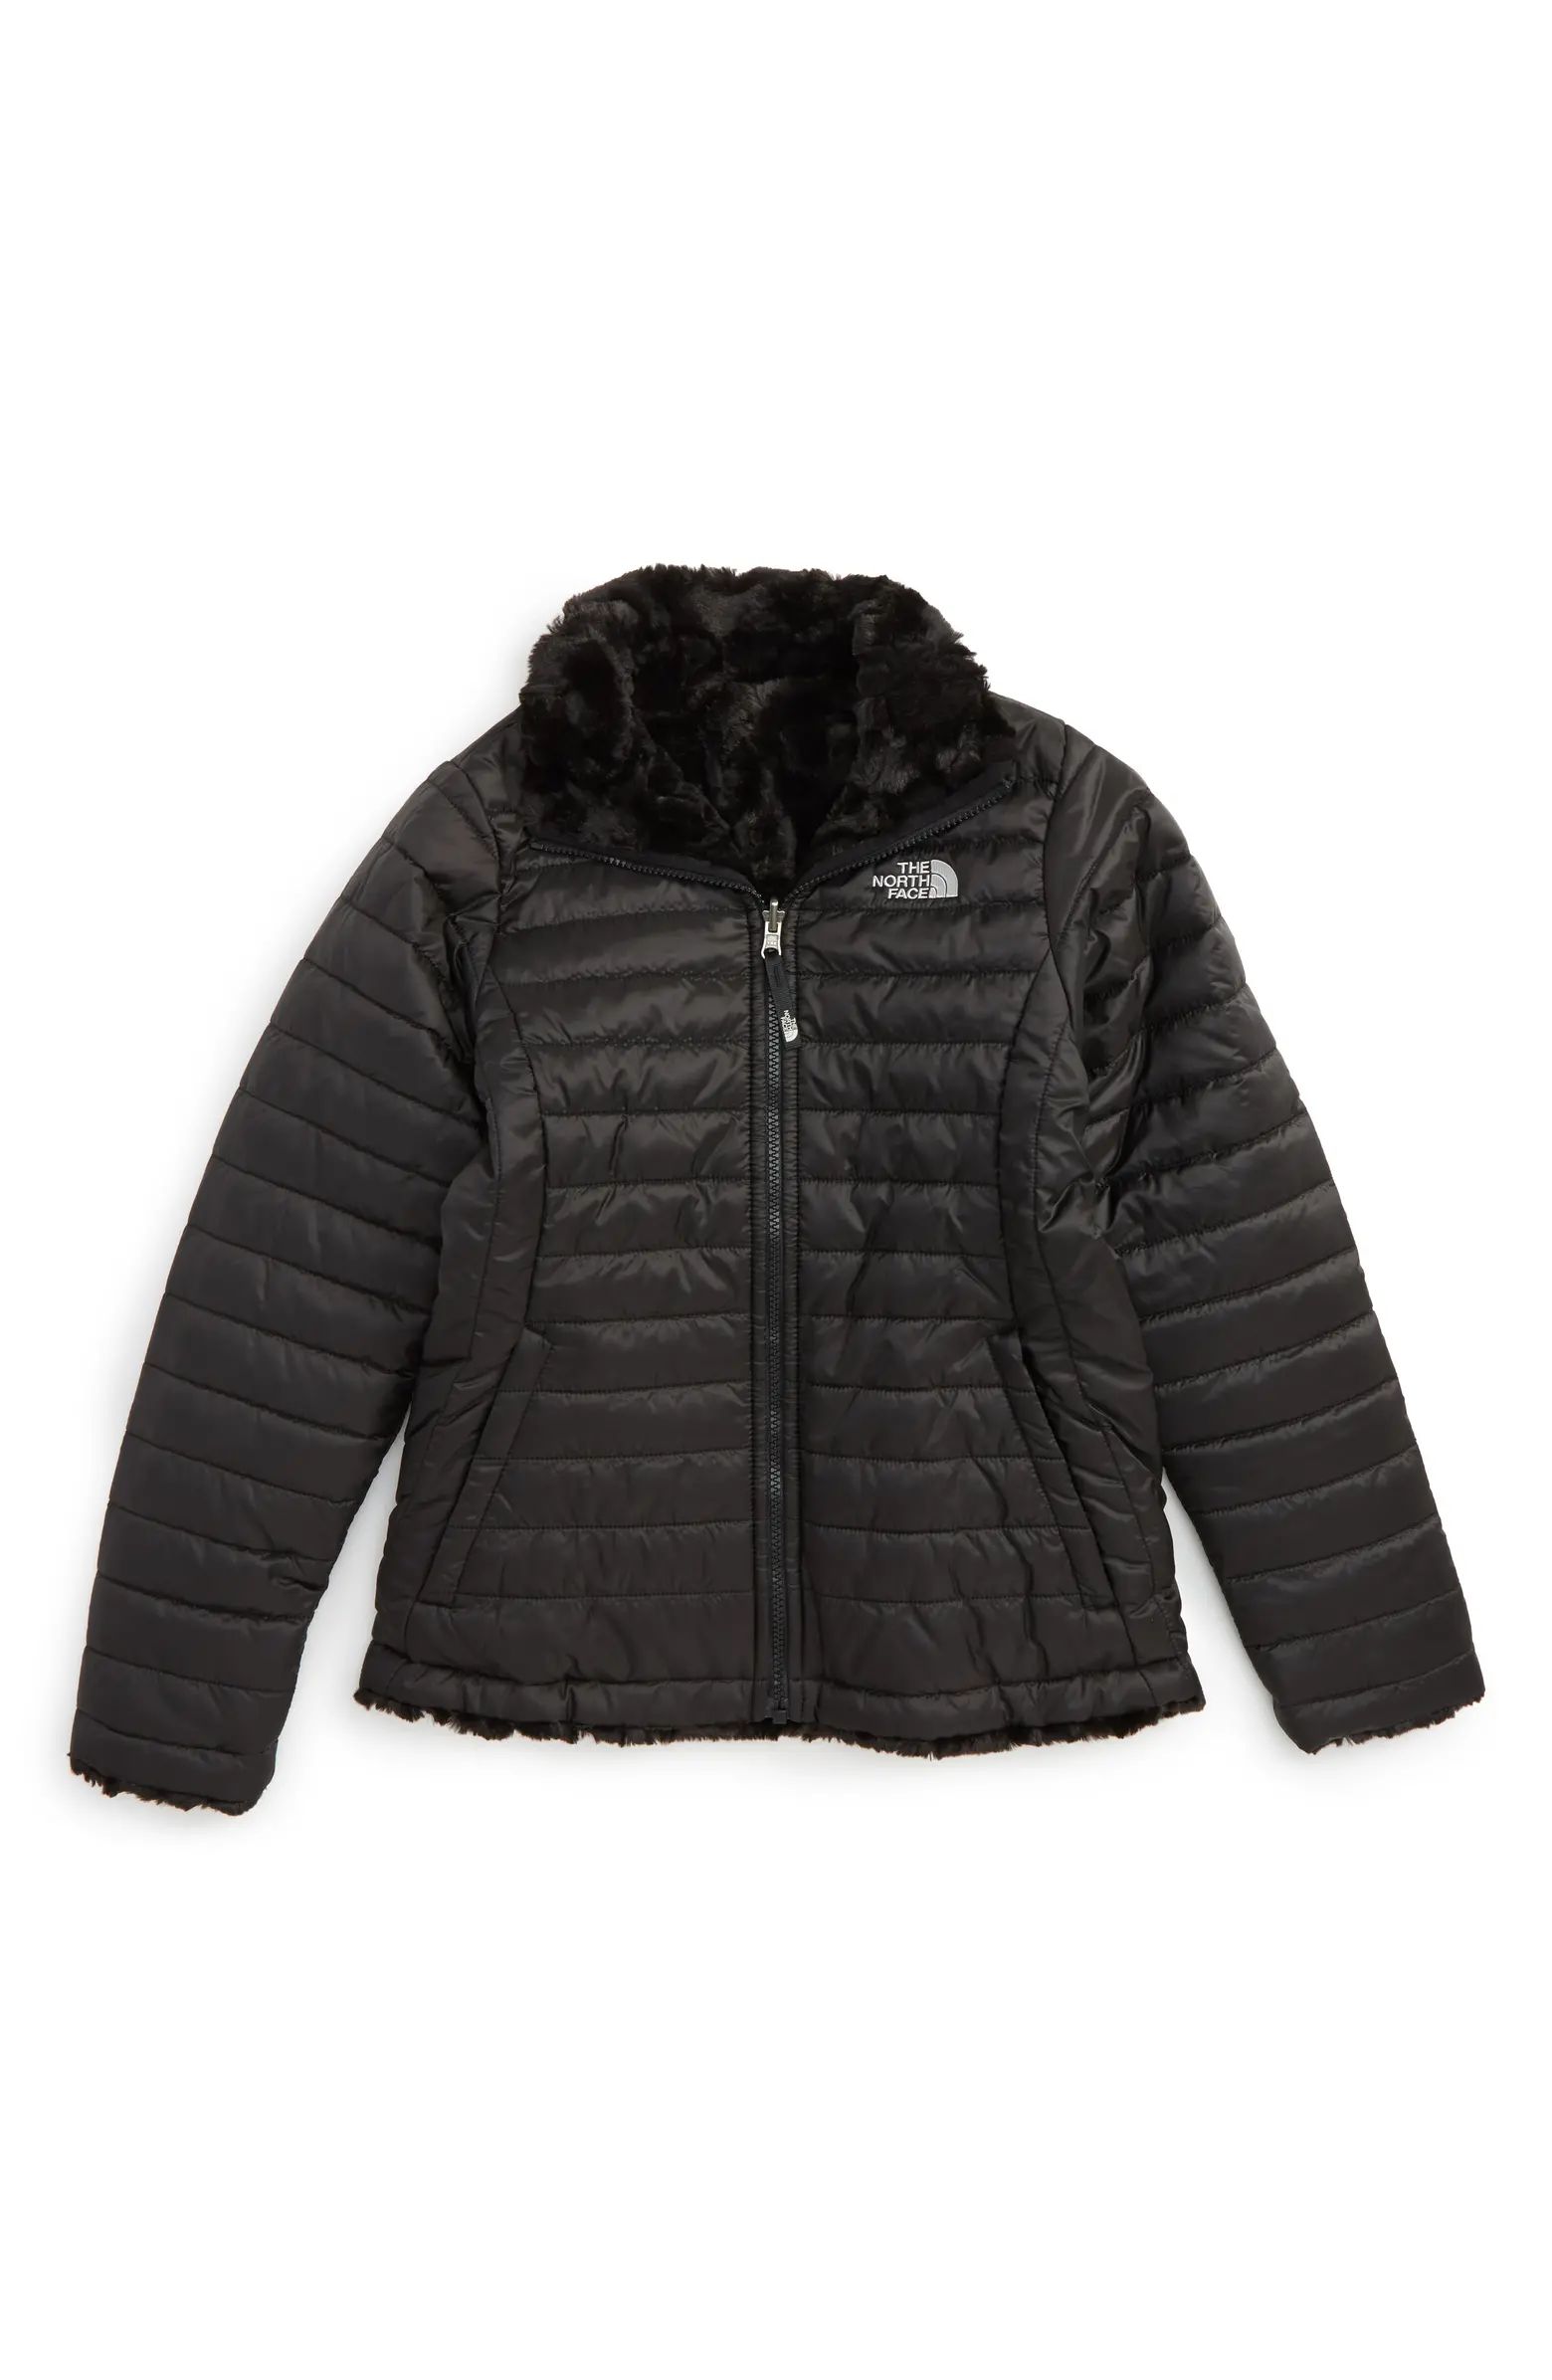 The North Face 'Mossbud Swirl' Reversible Water Repellent Jacket (Little Girls & Big Girls) | Nor... | Nordstrom